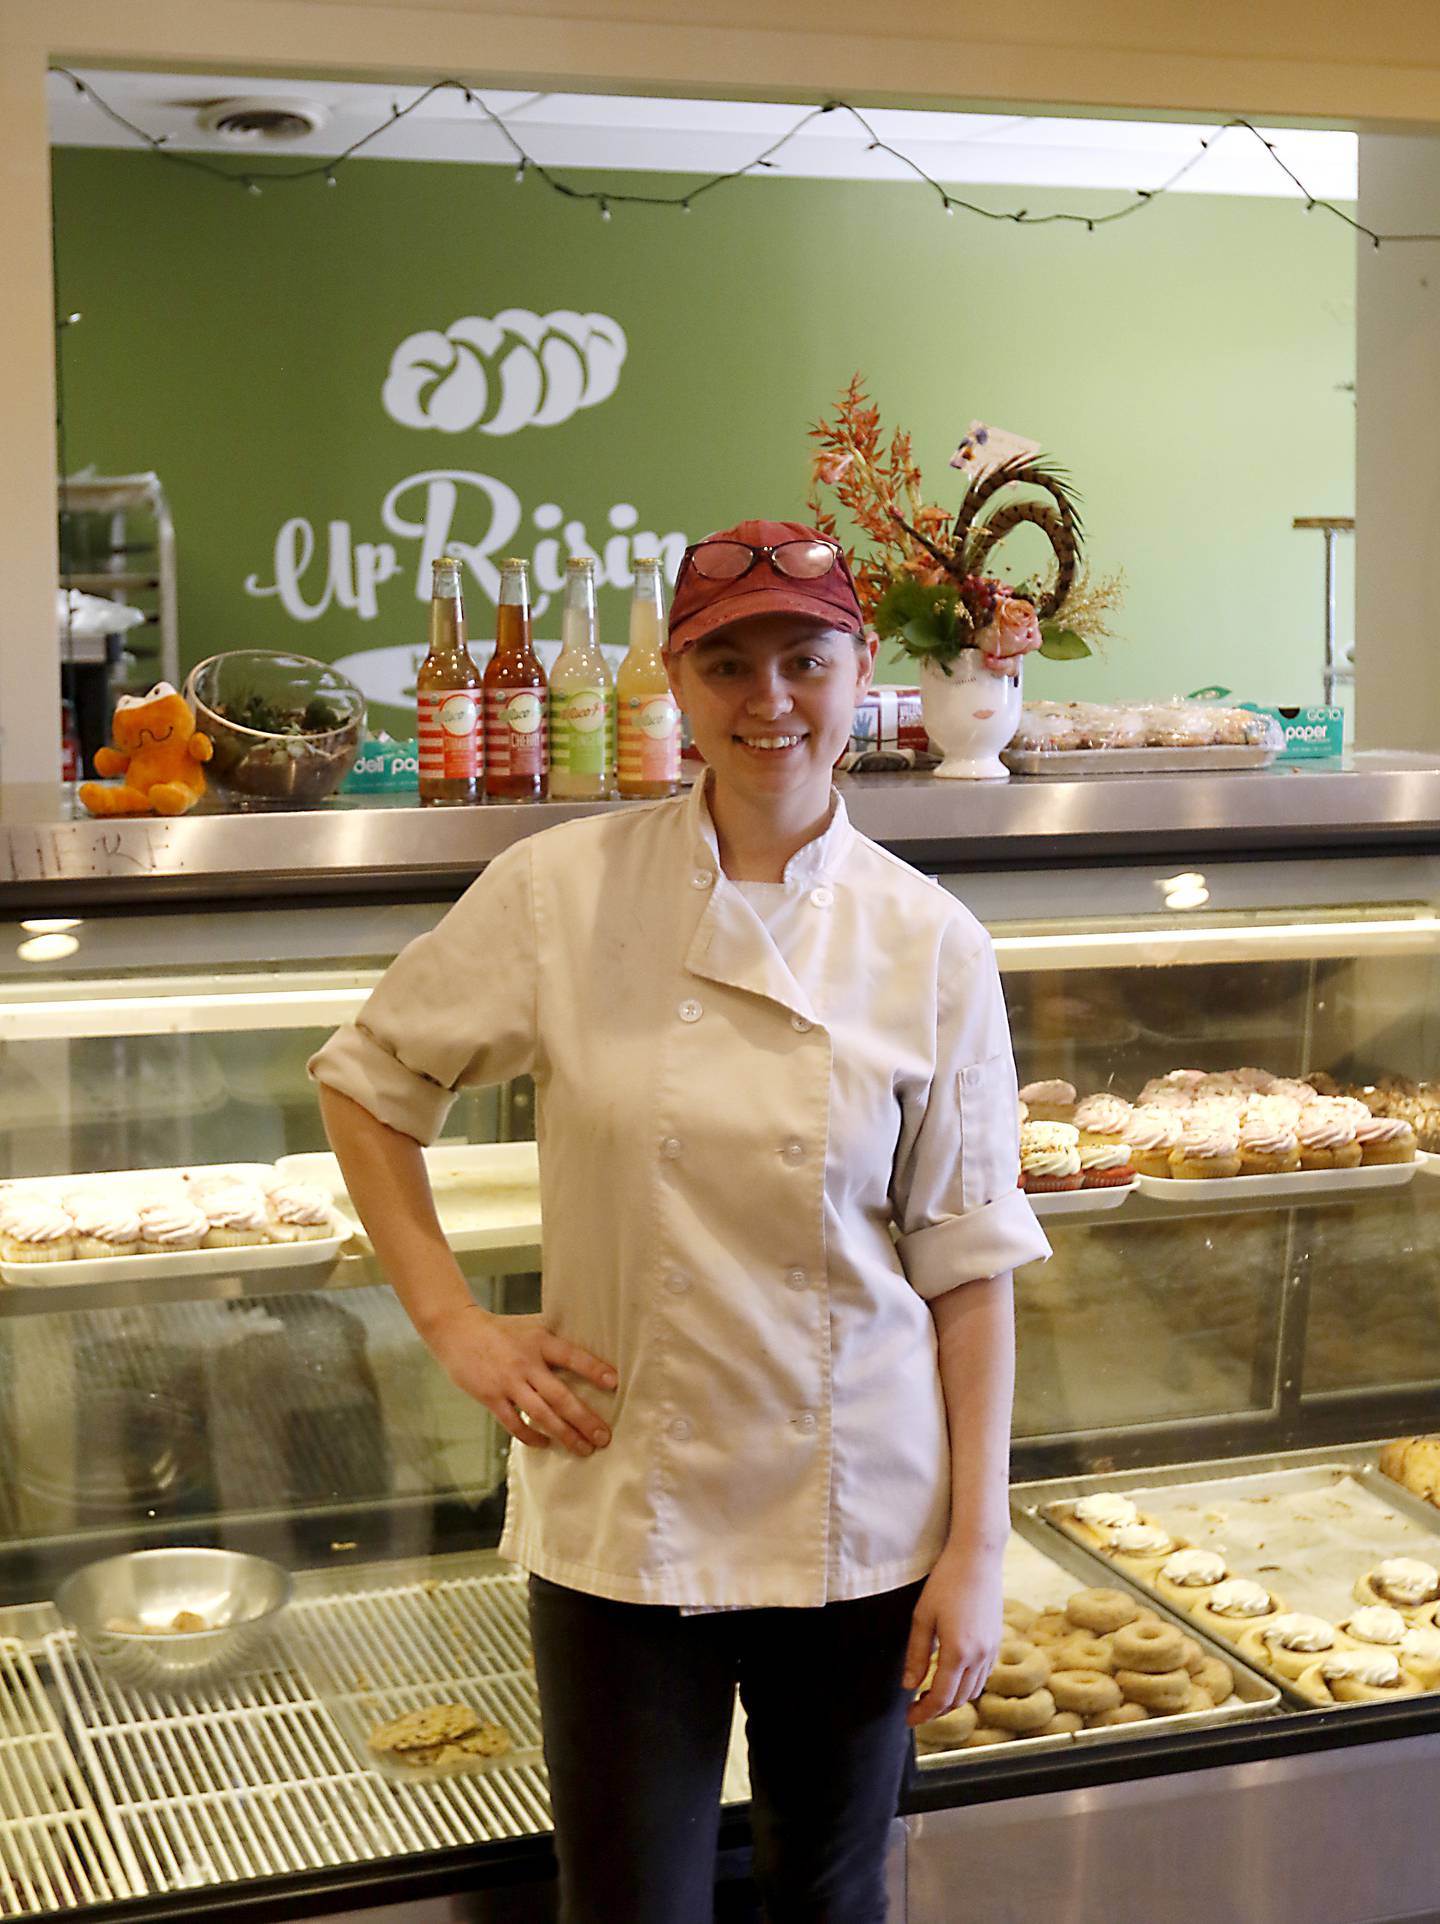 Corinna Sac, the owner of UpRising Bakery and Cafe, 2104 W. Algonquin Road in Lake in the Hills, on Tuesday, Oct. 4, 2022. After opening a bakery in 2021, Sac began hosting events to try and supplement her business' income. One of those events – a drag brunch – led to threats and vandalism but also an outpouring of support.